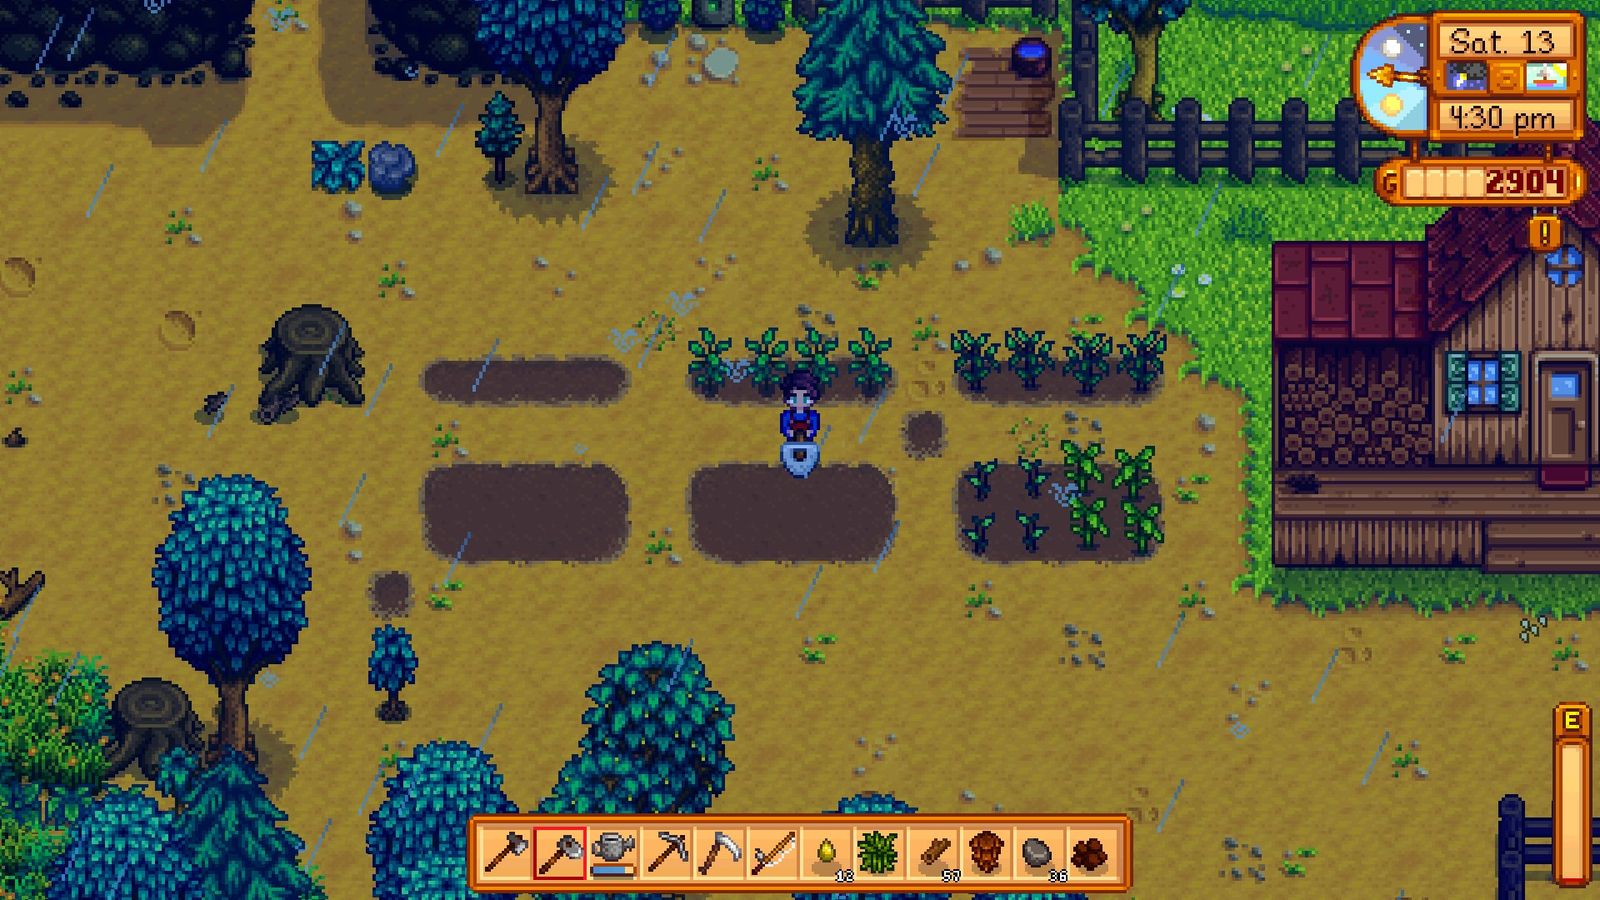 Clay in Stardew Valley can be found by tilling soil with the hoe